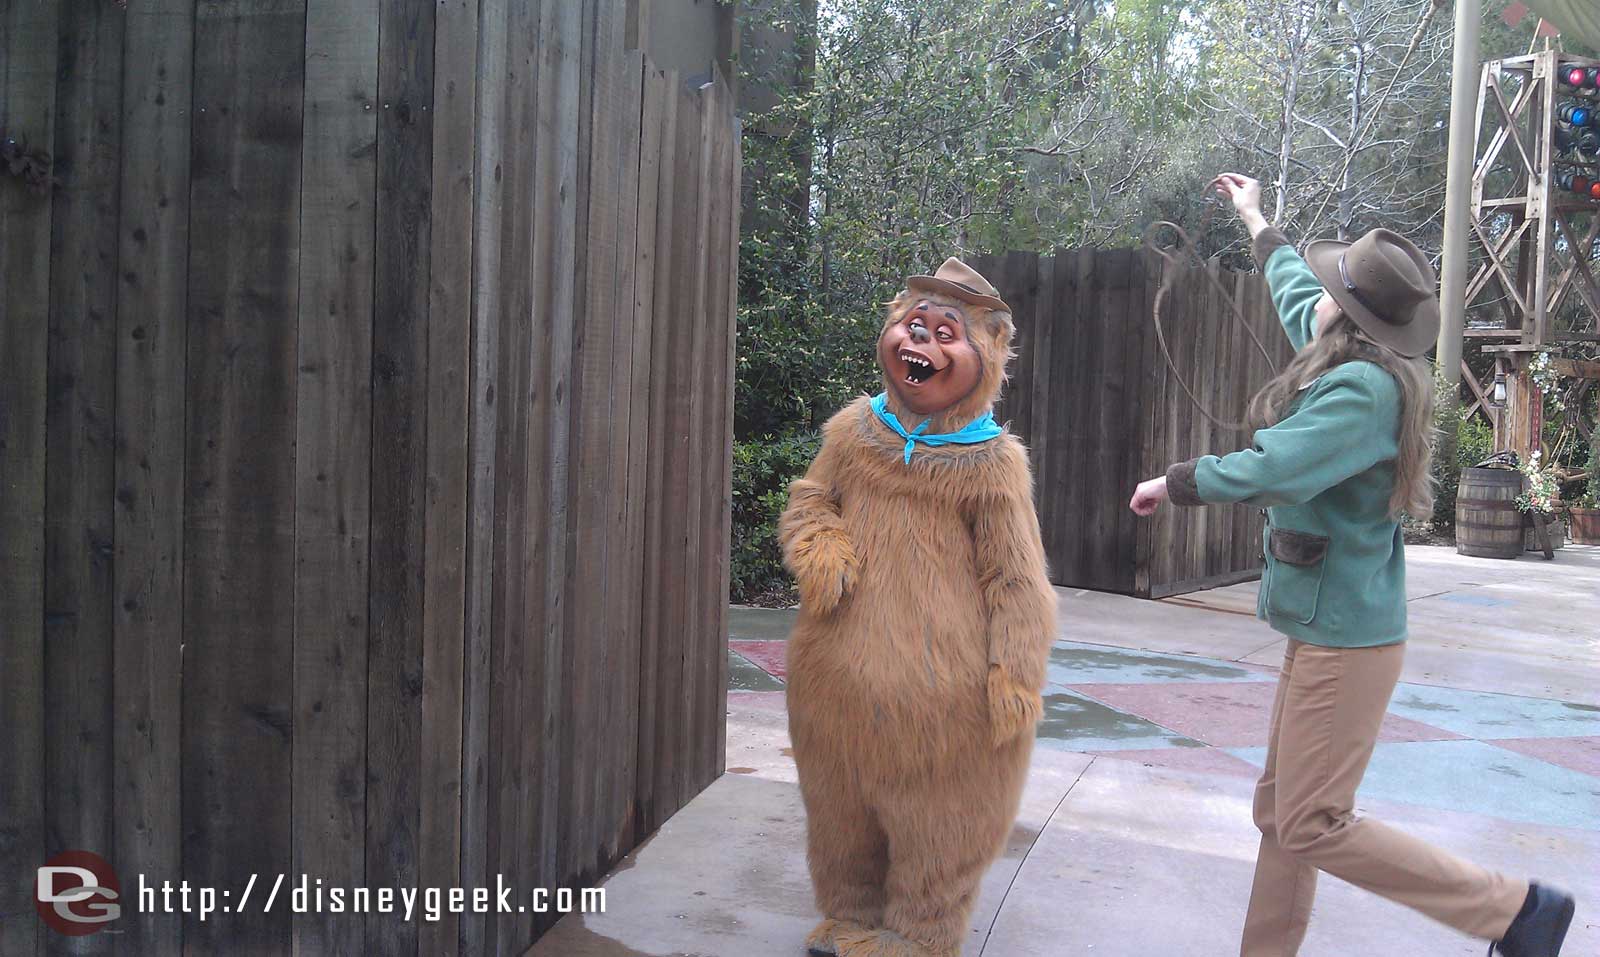 The Big Thunder Ranch is peaceful this afternoon just a couple Country Bears roaming around